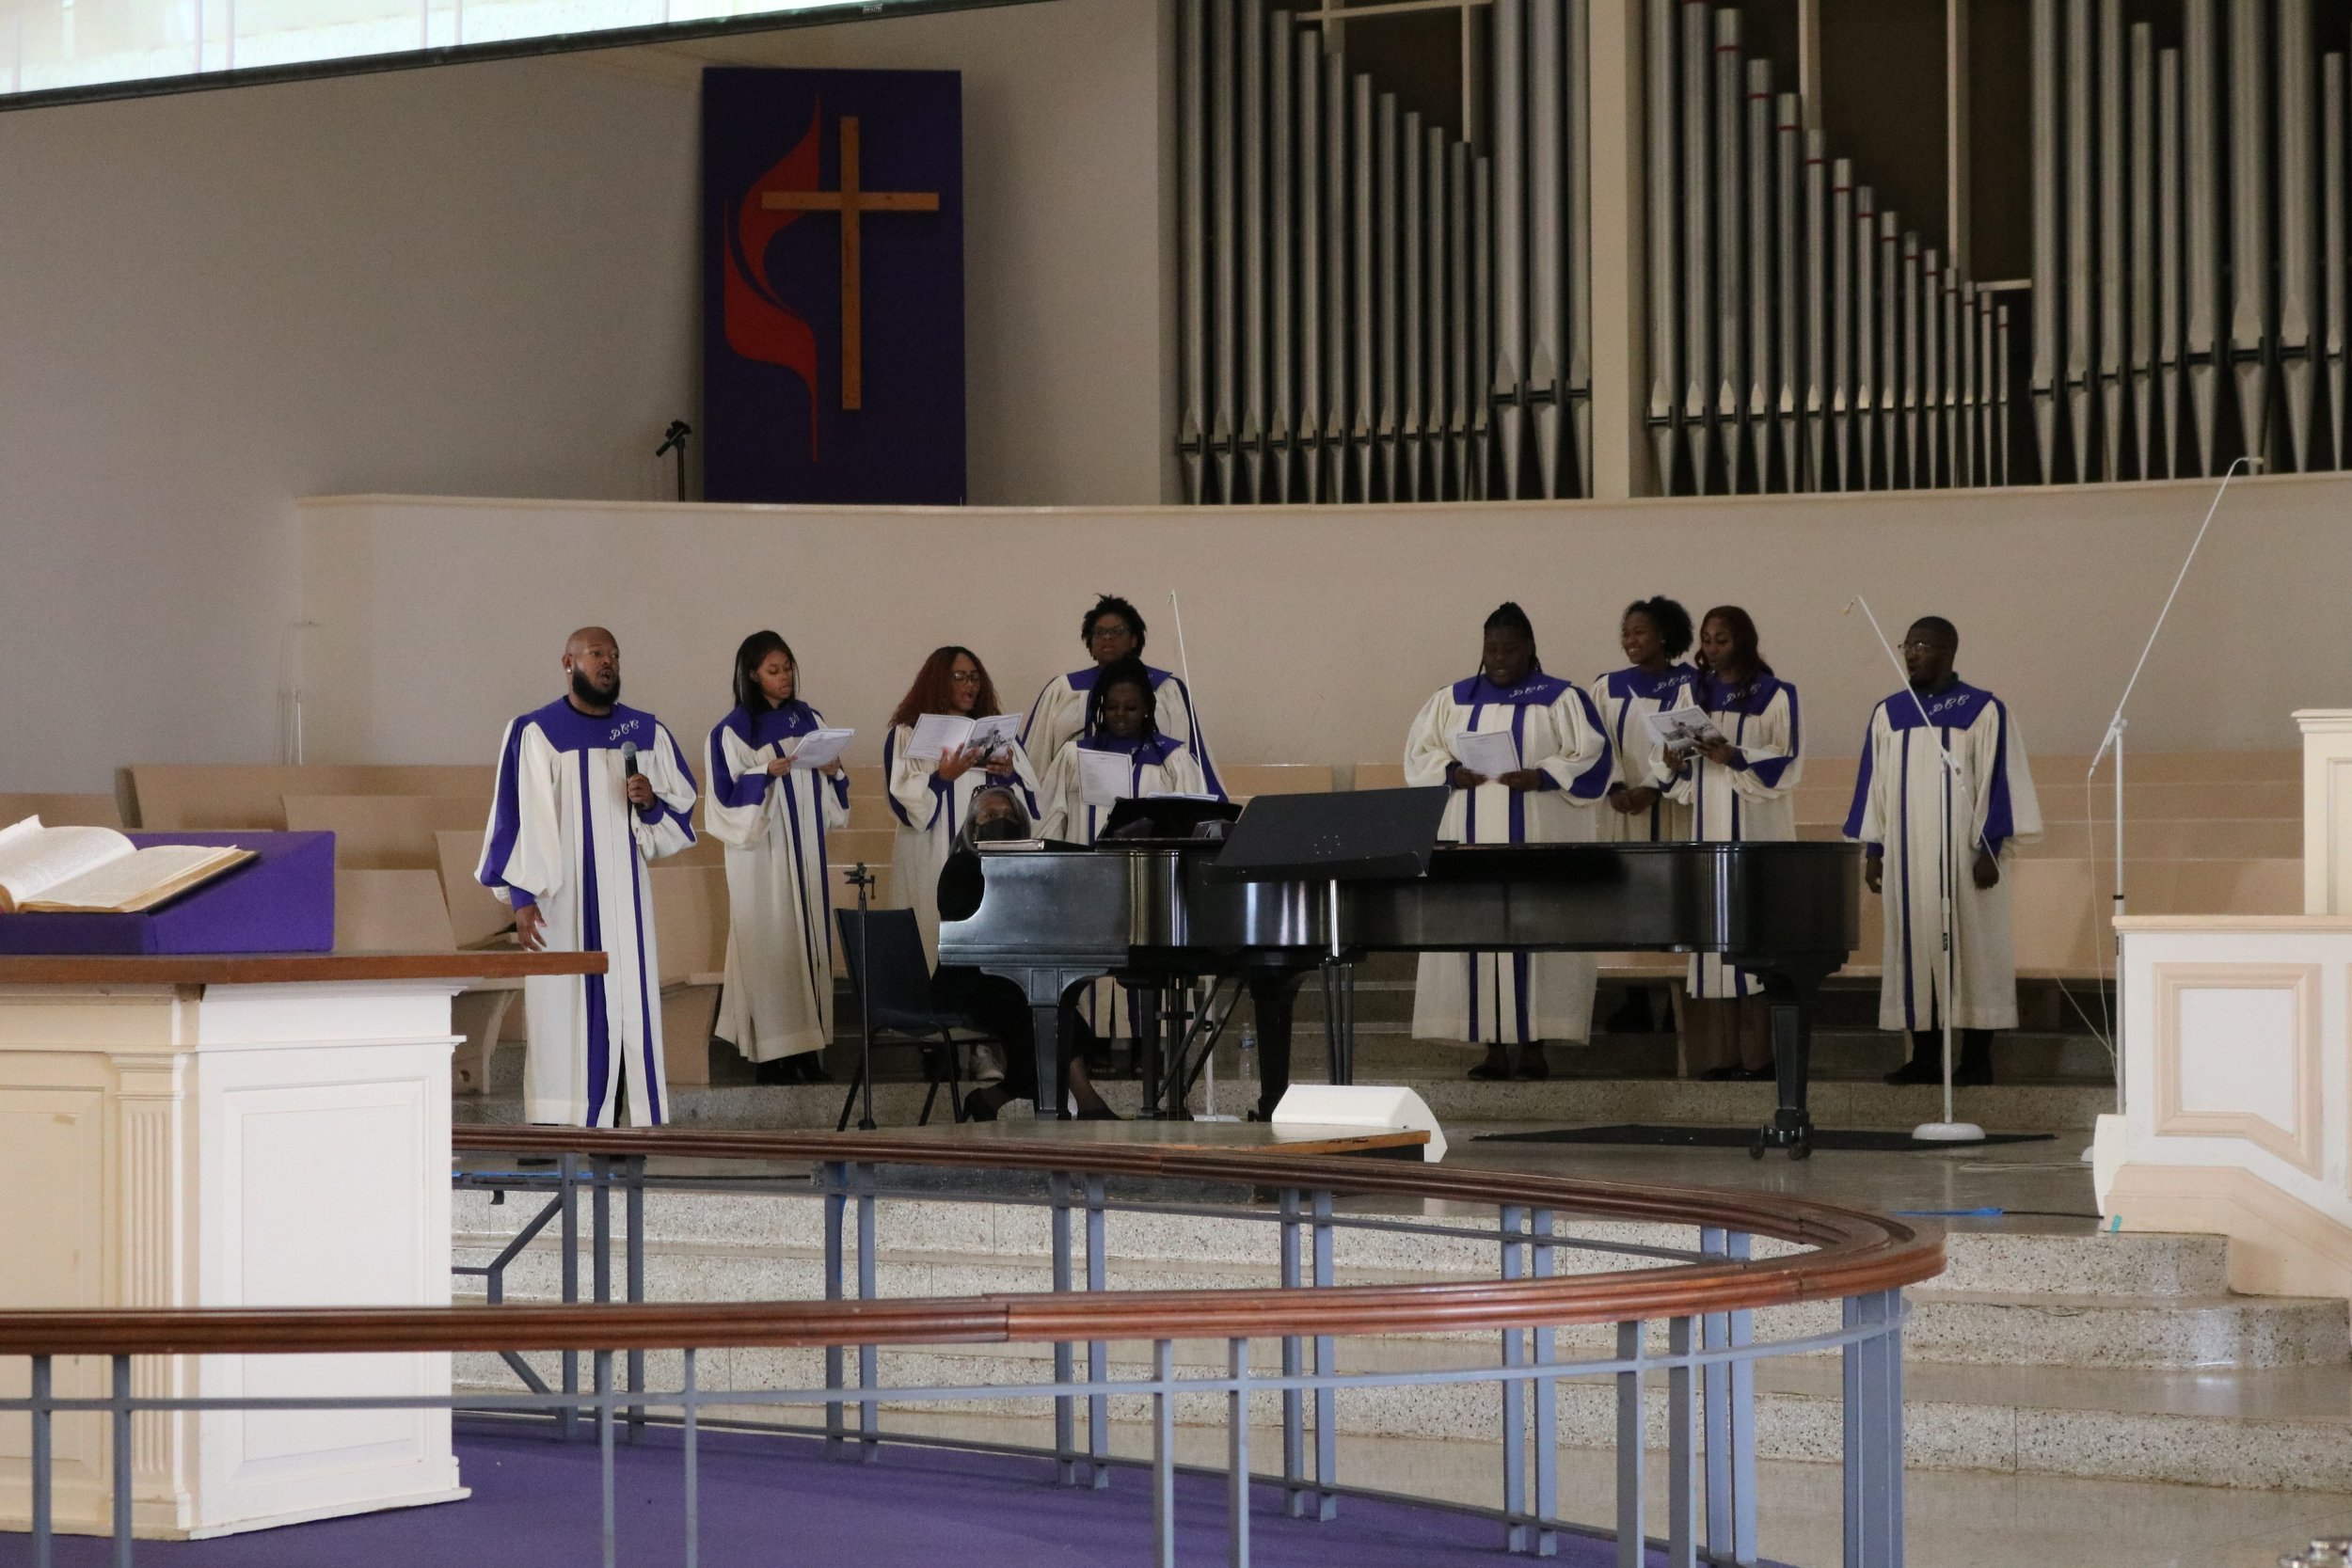   A choir of students sing at Paine College Gilbert-Lambuth Memorial Chapel on Jan. 13. 